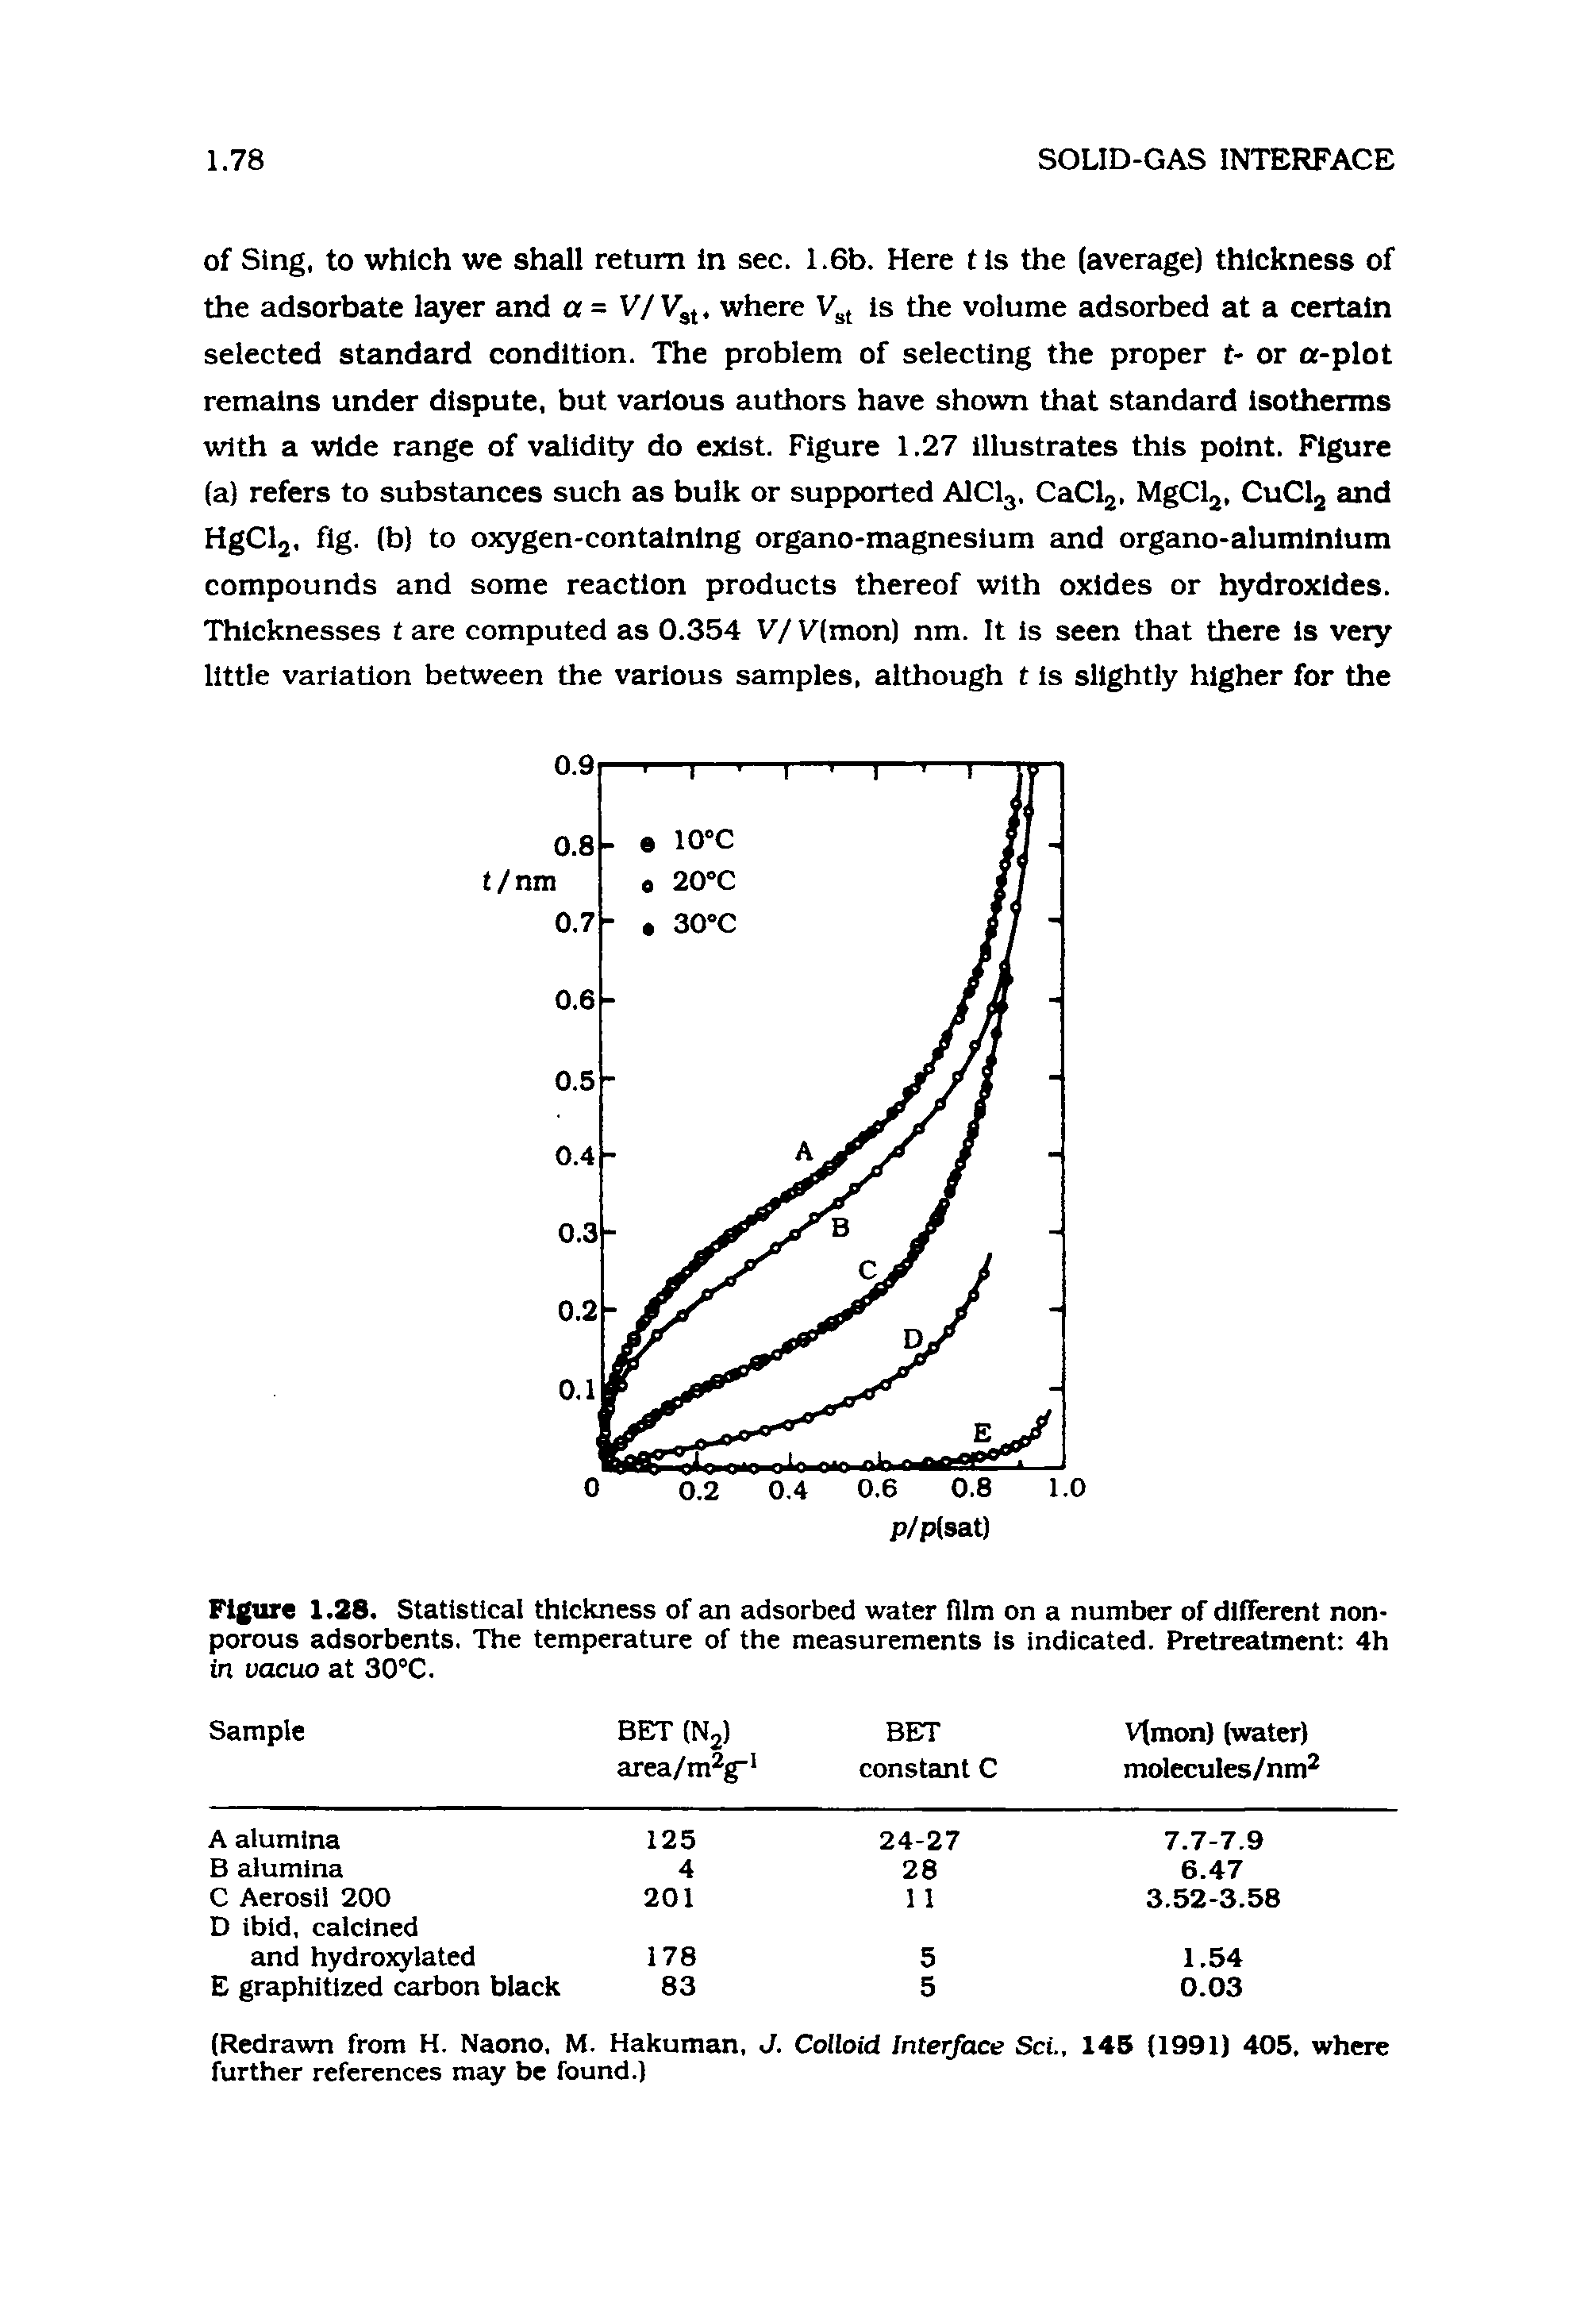 Figure 1.28. Statistical thickness of an adsorbed water film on a number of different non-porous adsorbents. The temperature of the measurements is indicated. Pretreatment 4h in vacuo at 30°C.